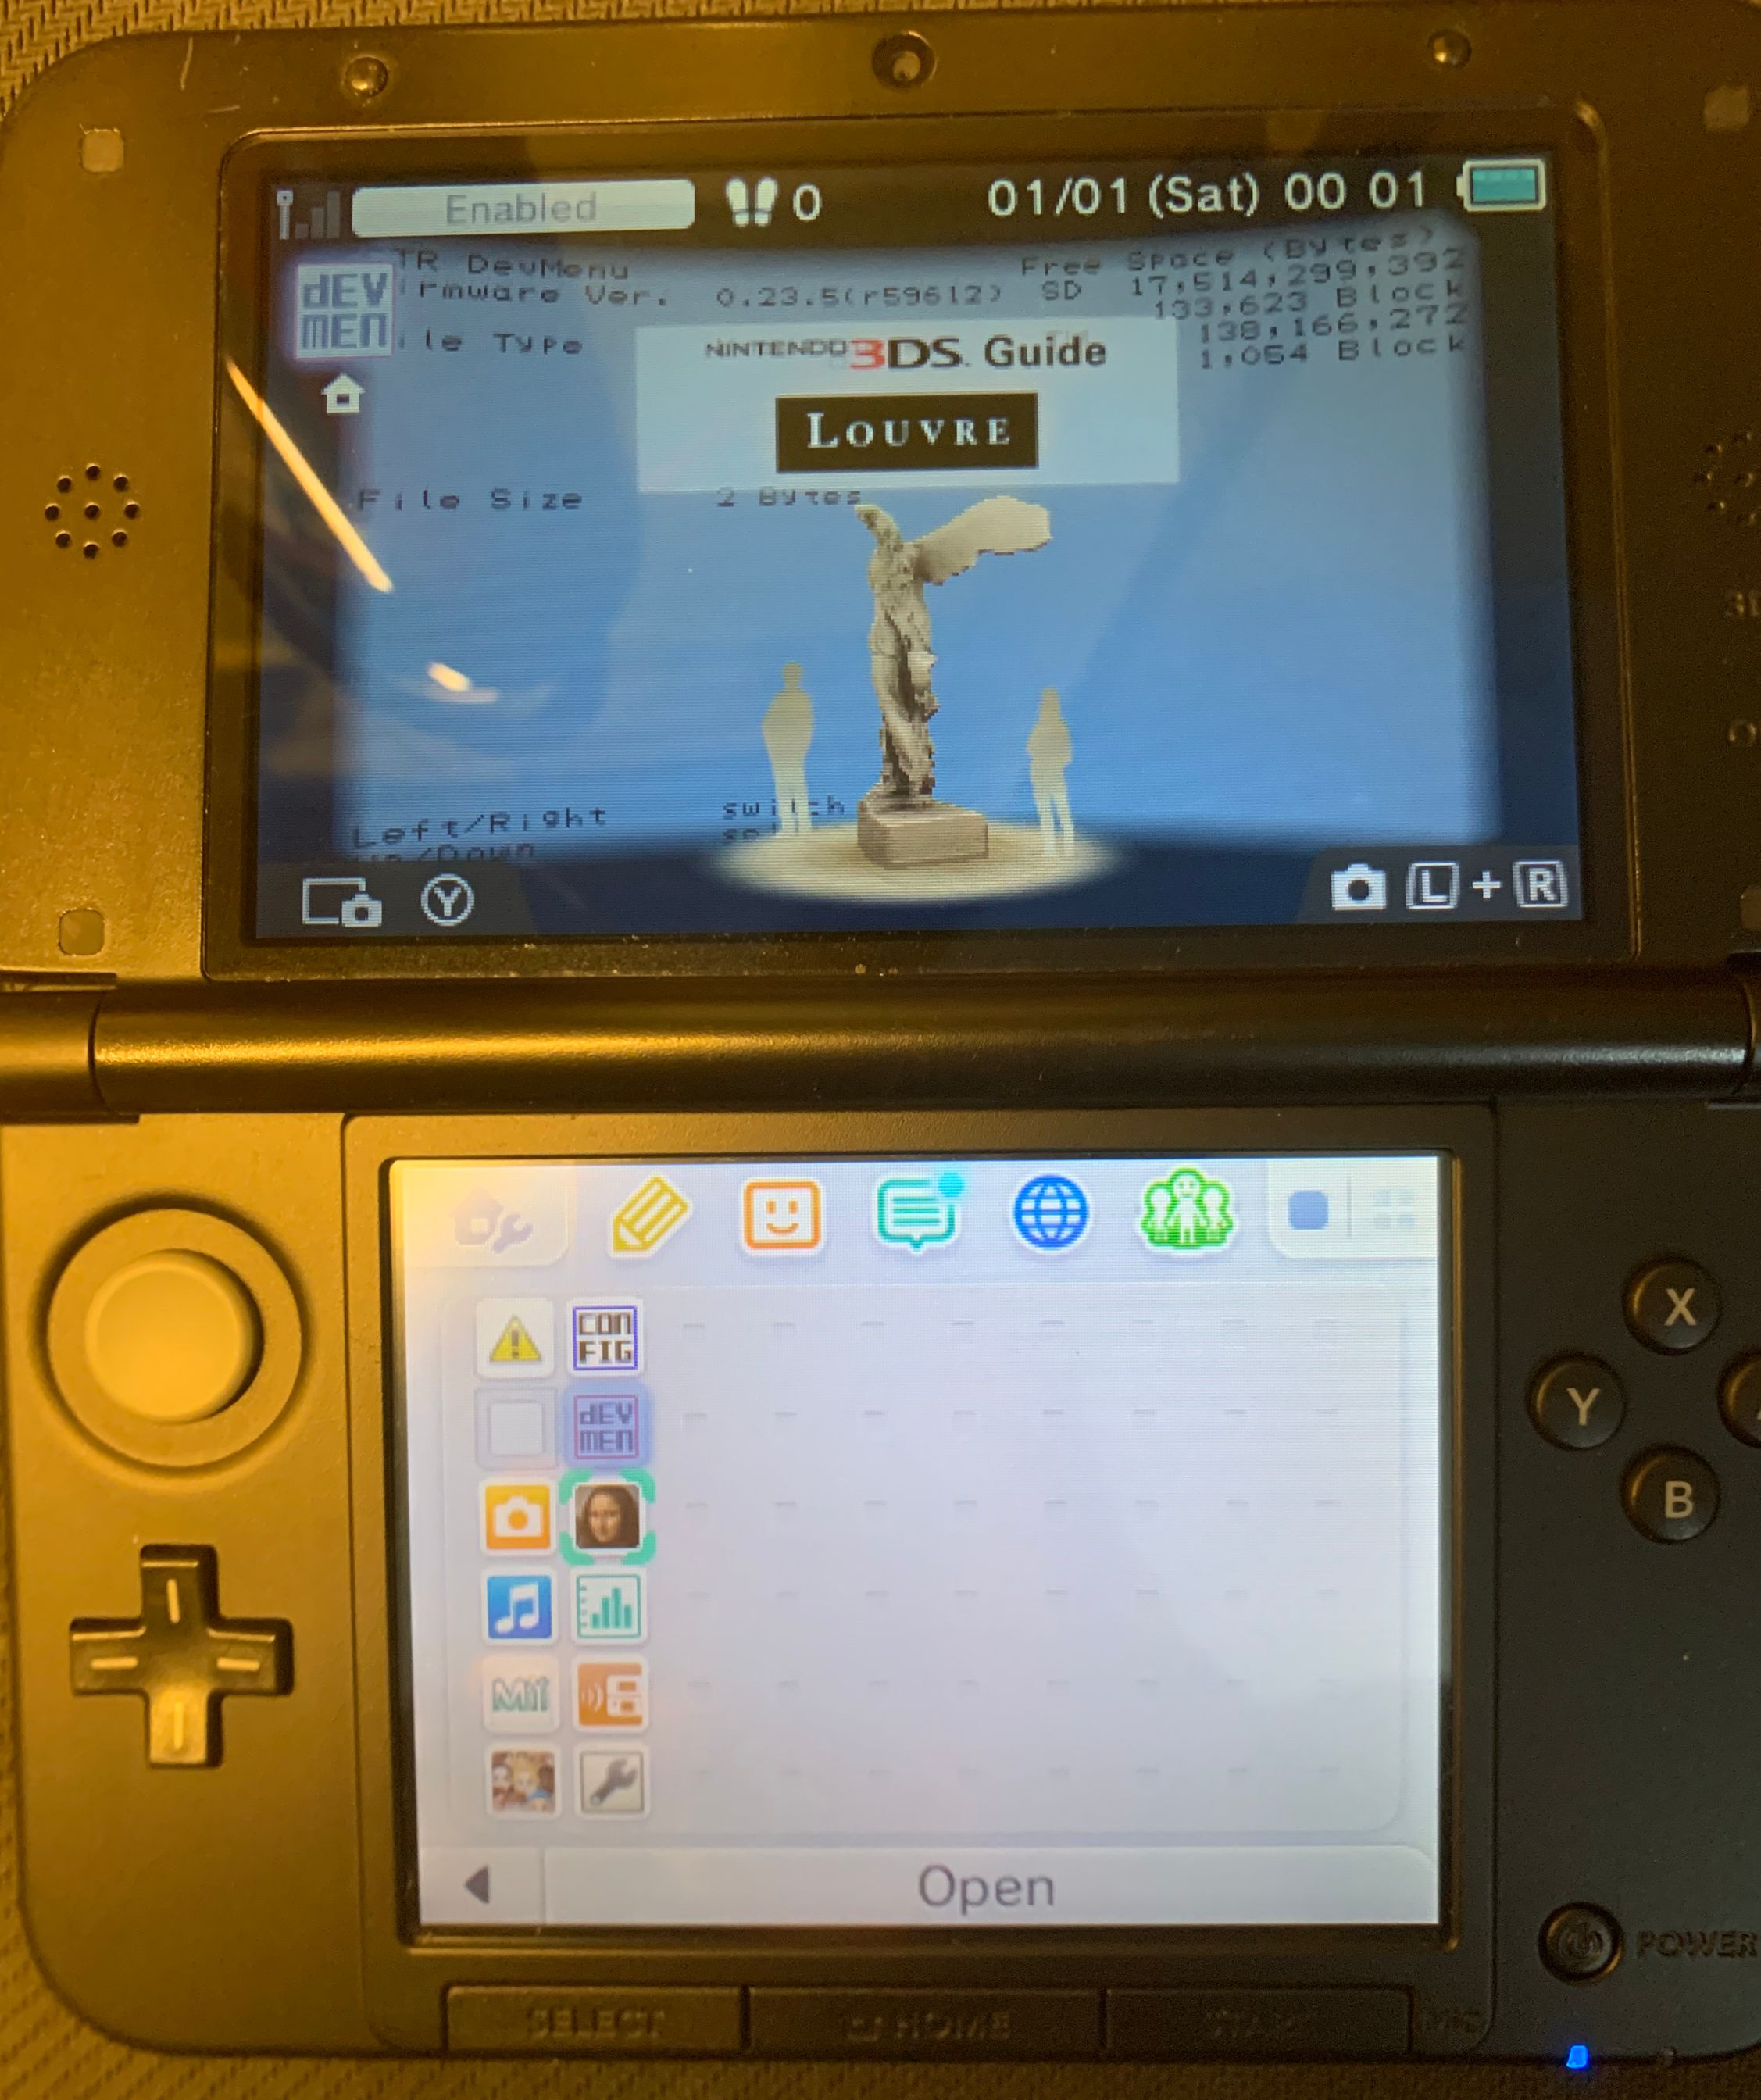 Louvre 3DSXL | GBAtemp.net - The Independent Video Game Community